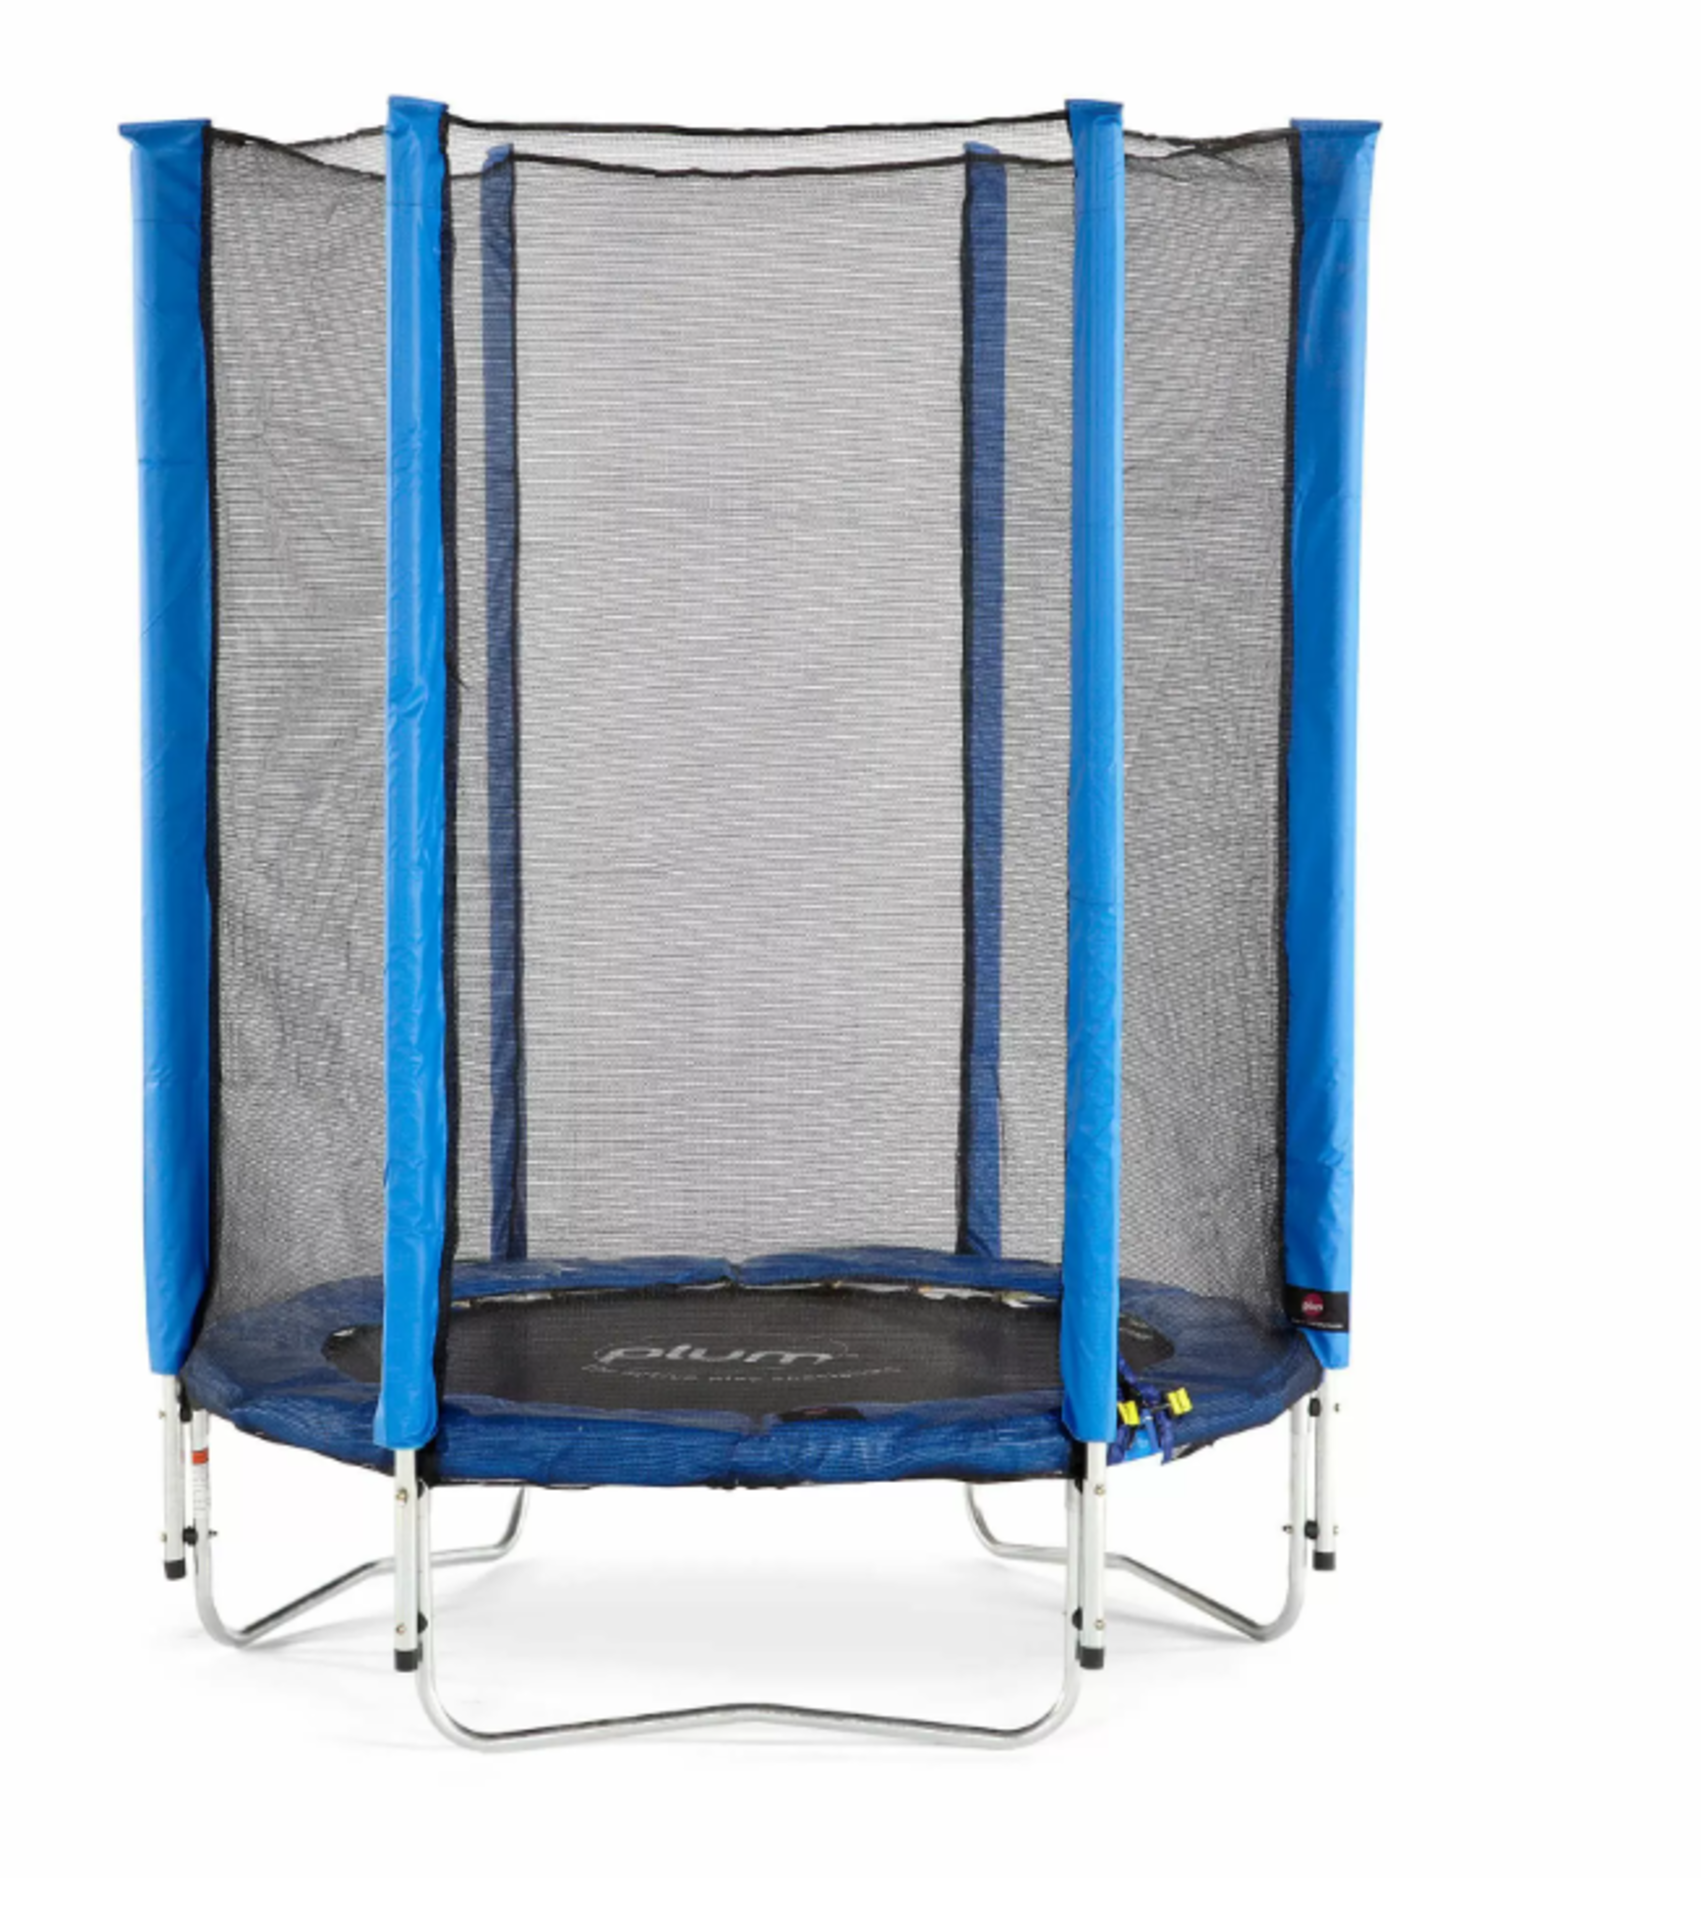 BLUE JUNIOR TRAMPOLINE AND ENCLOSURE - 4.5FT. RRP £199.99. Specifically designed for young children,